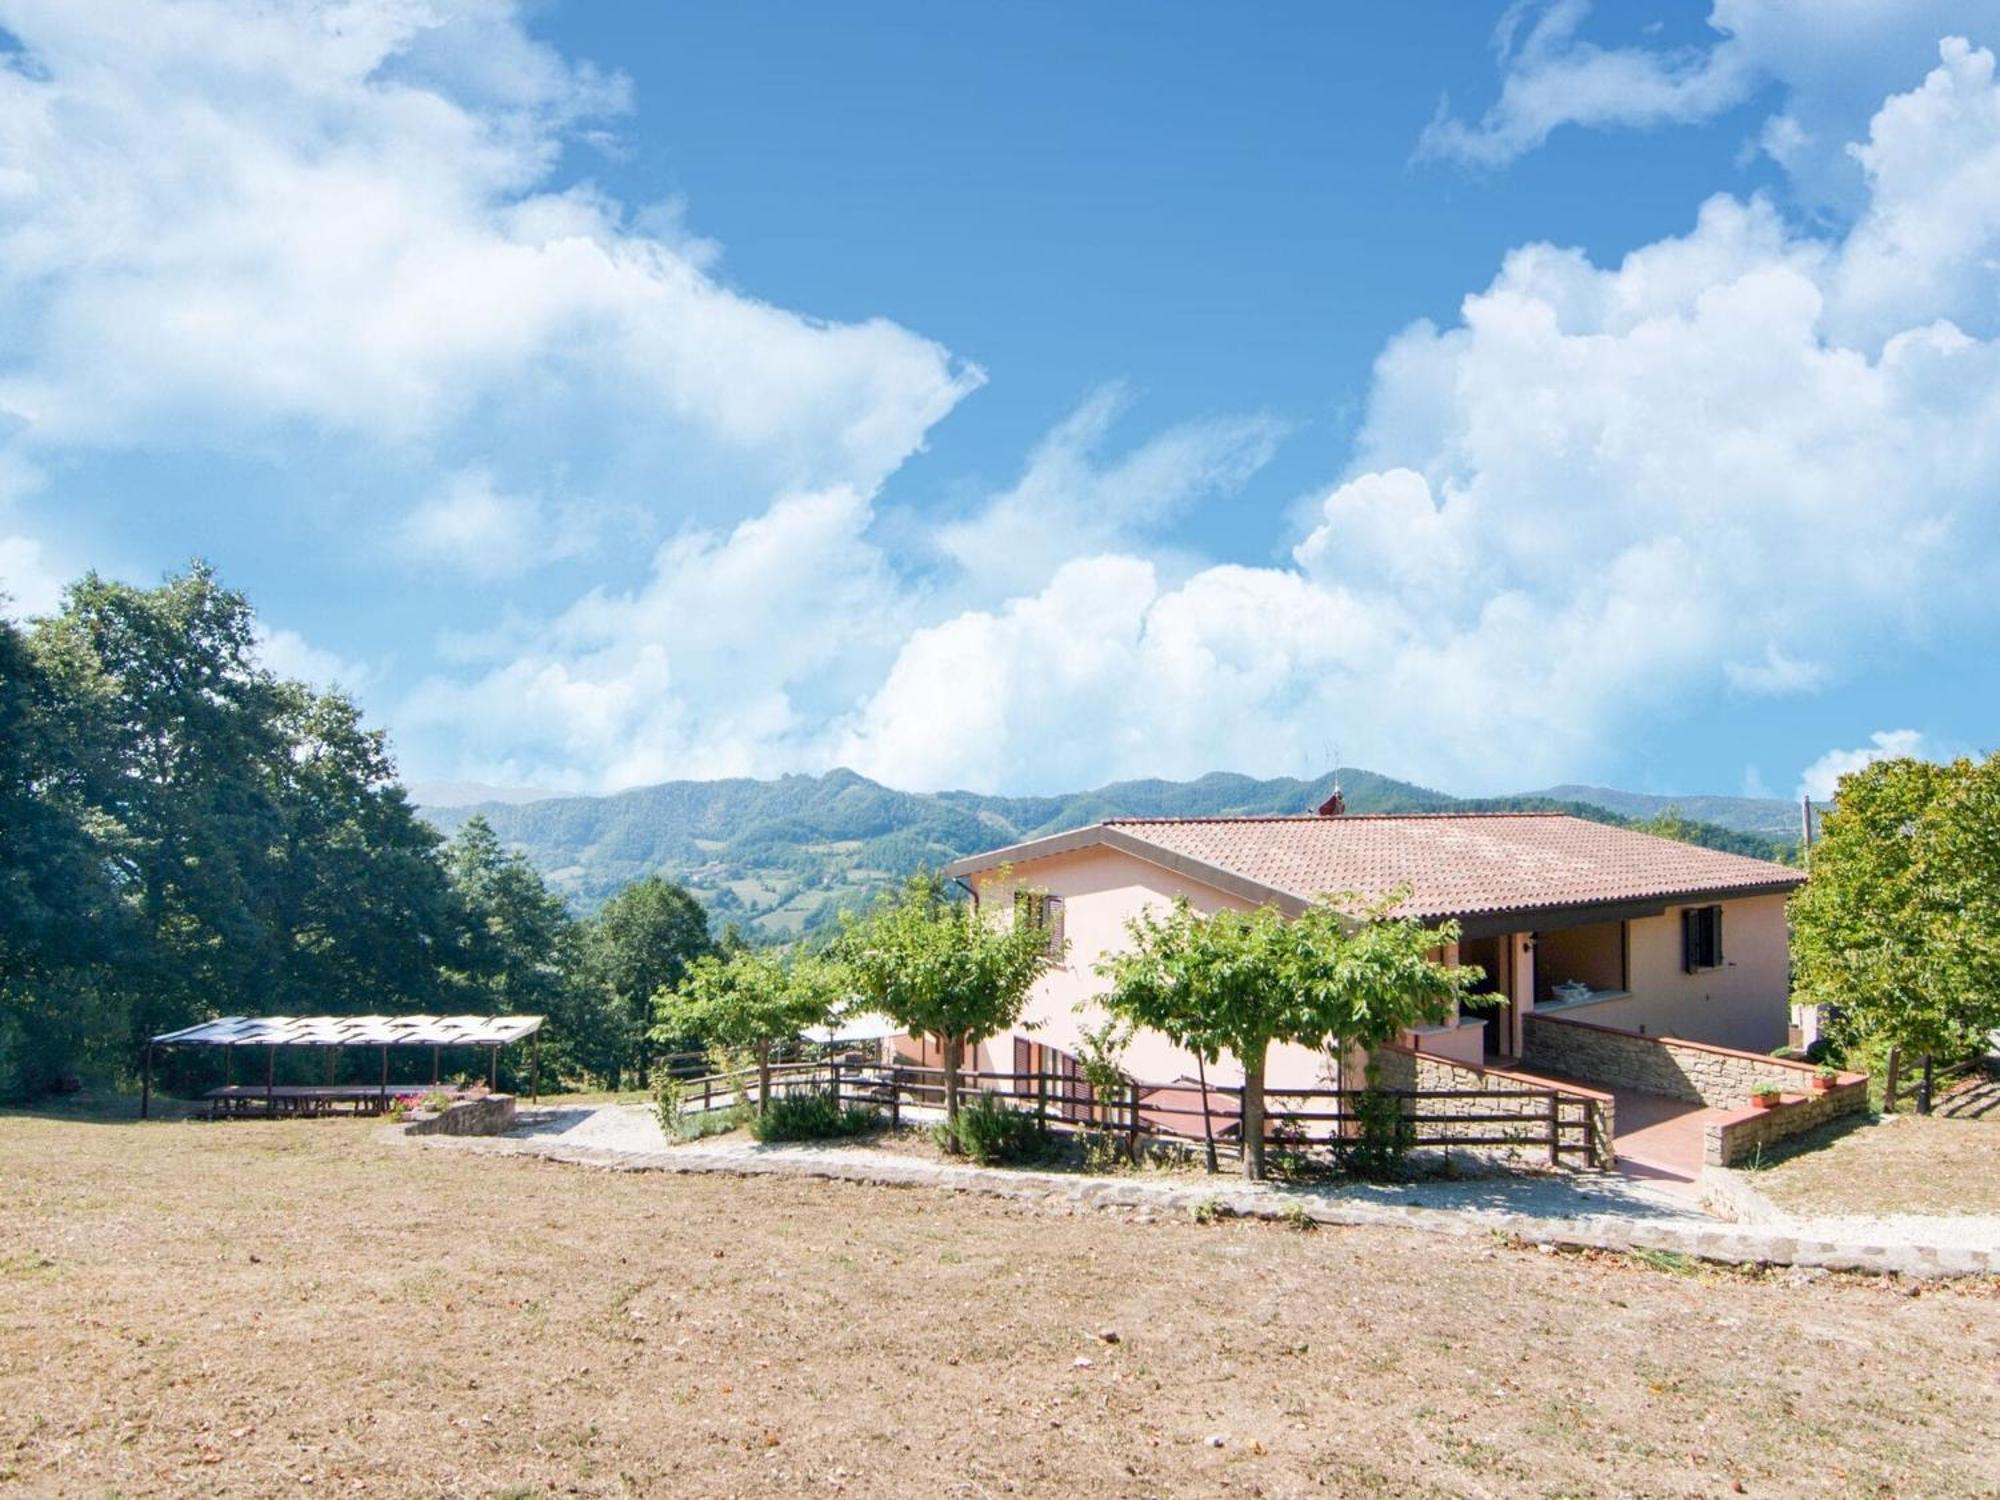 Inviting Farmhouse In Appenines With Covered Swimming Pool Apecchio 外观 照片